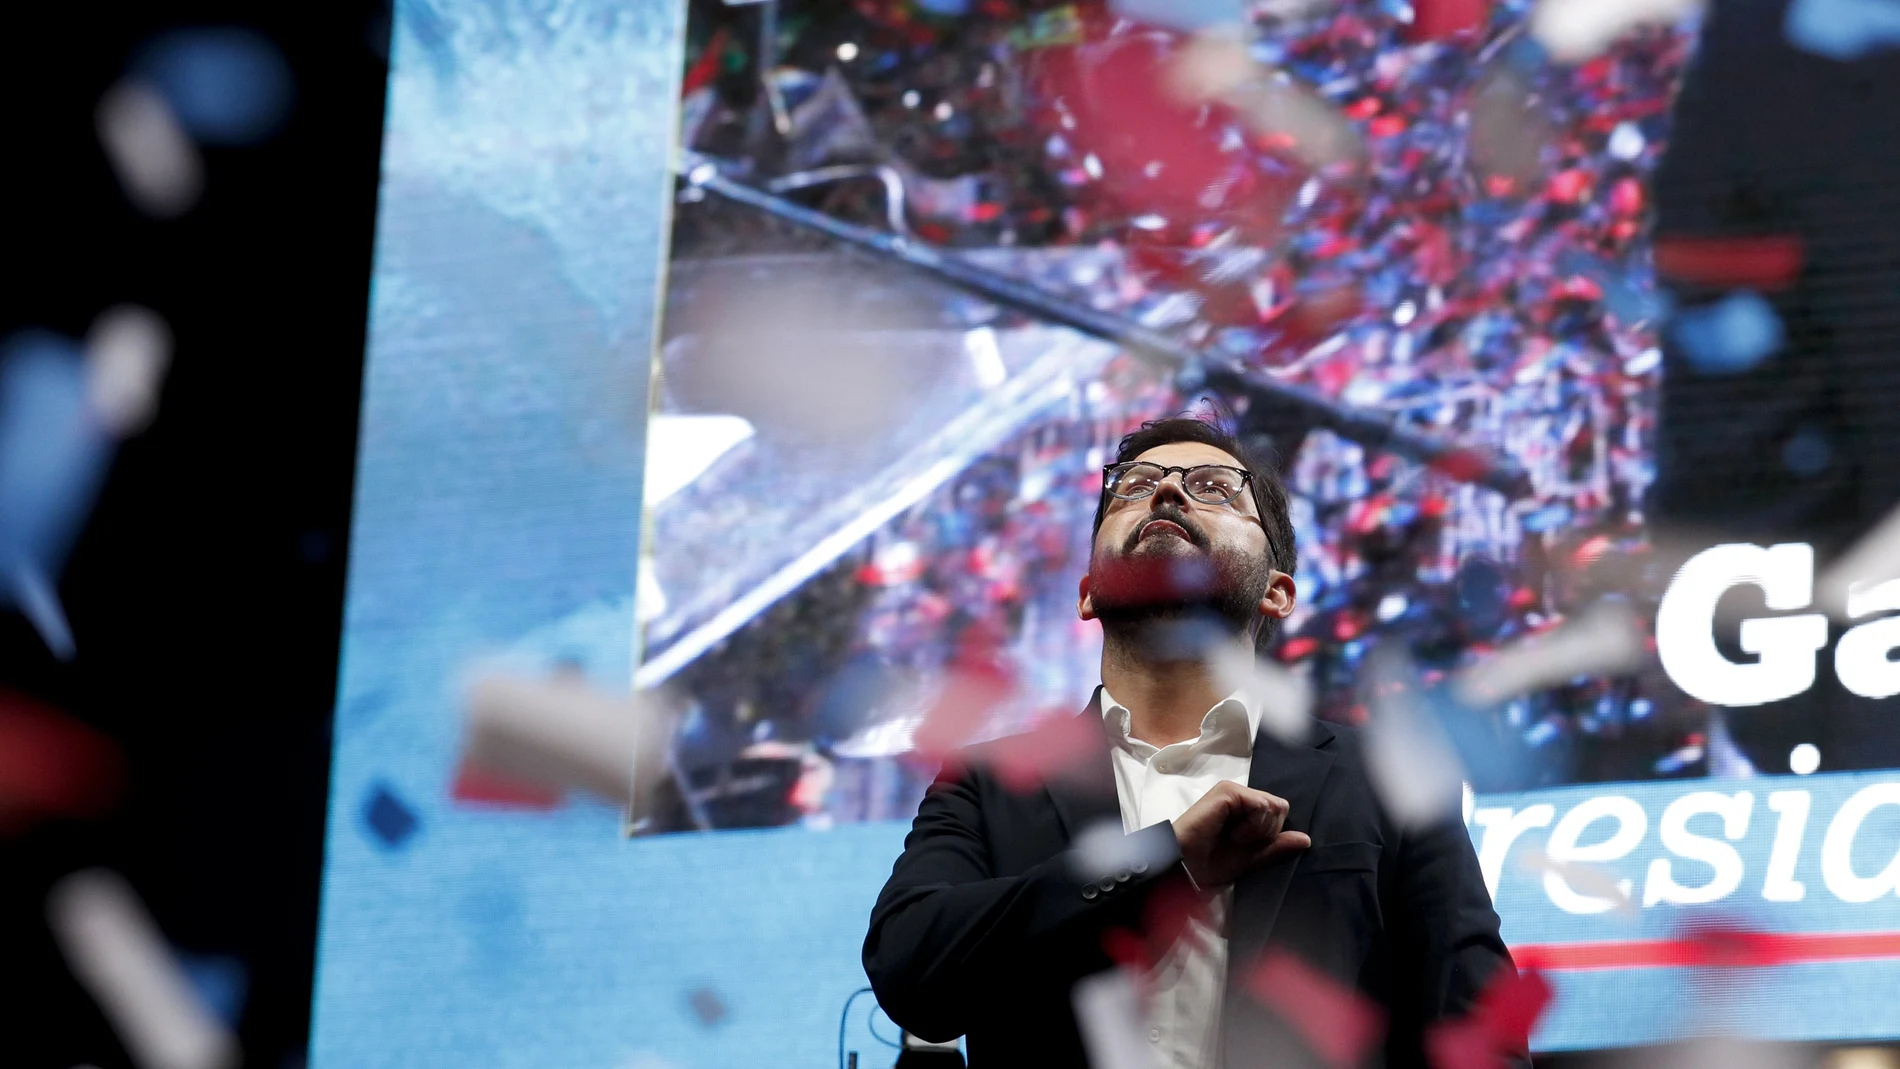 Chile's President elect Gabriel Boric, of the "I approve Dignity" coalition, celebrates his victory in the presidential run-off election ,Â in Santiago, Chile, Sunday, Dec. 19, 2021. (AP Photo/Luis Hidalgo)